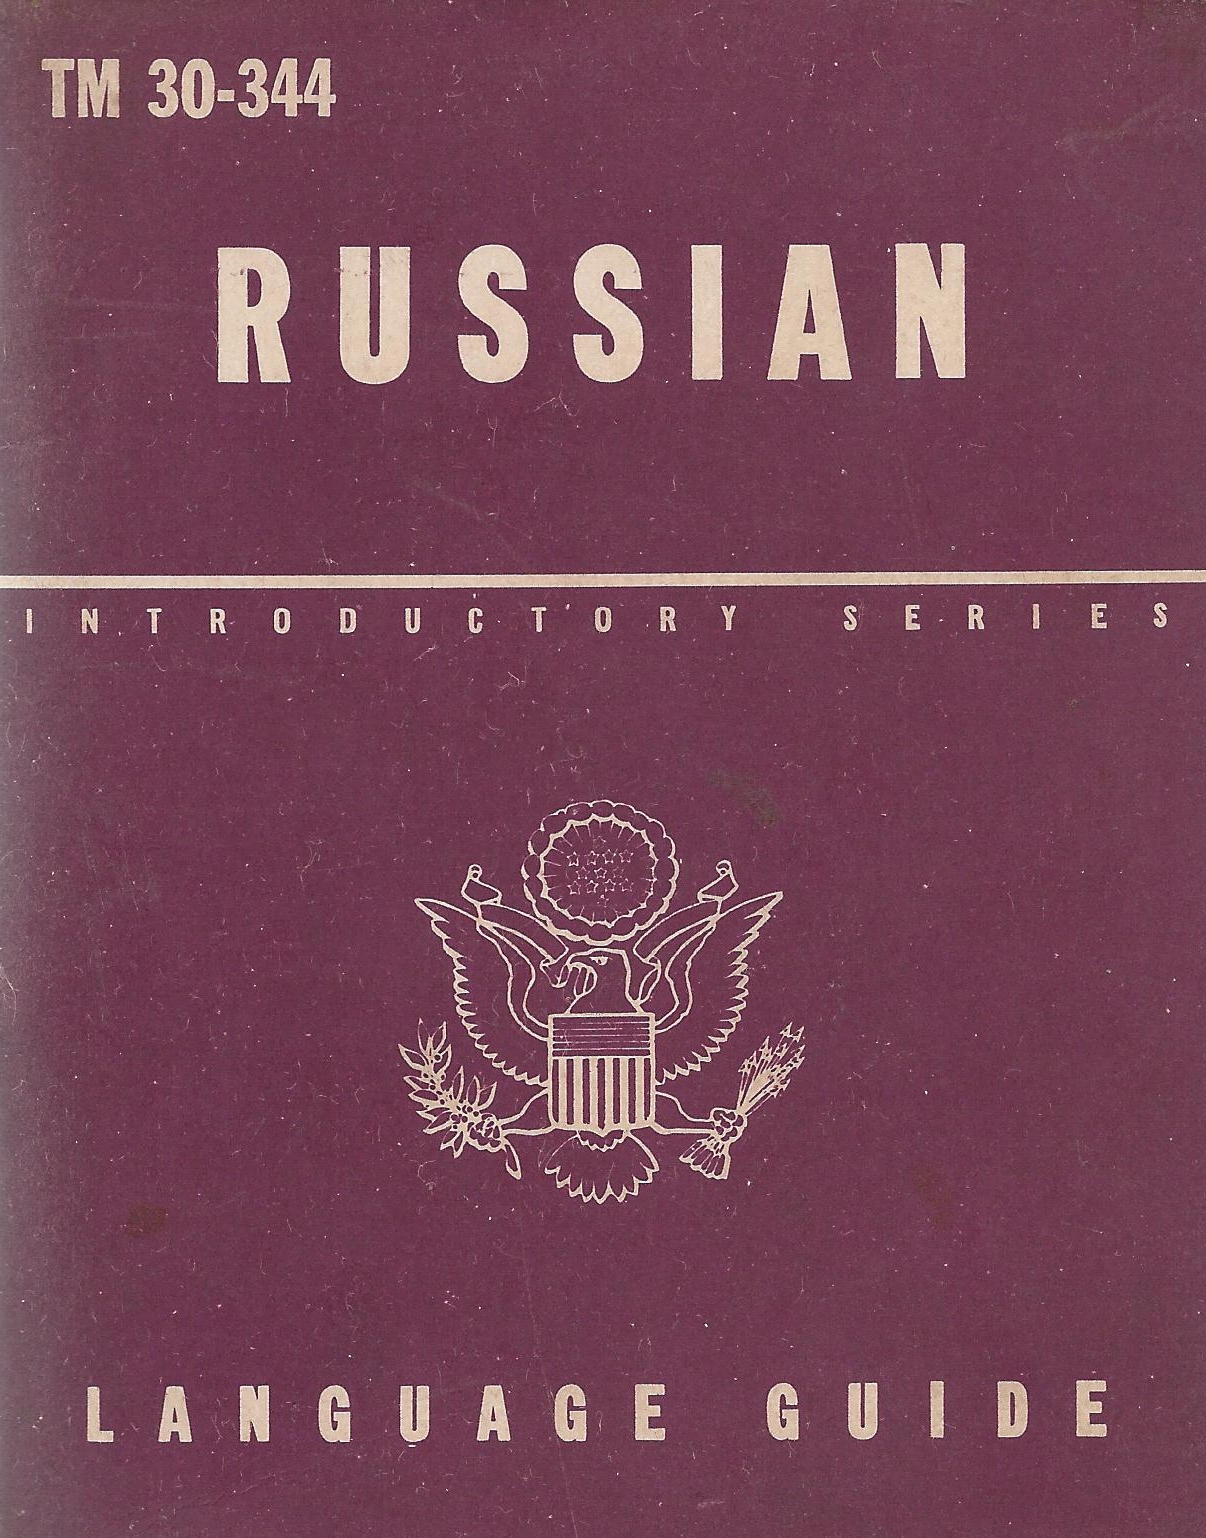 This Russian Language Guide 102